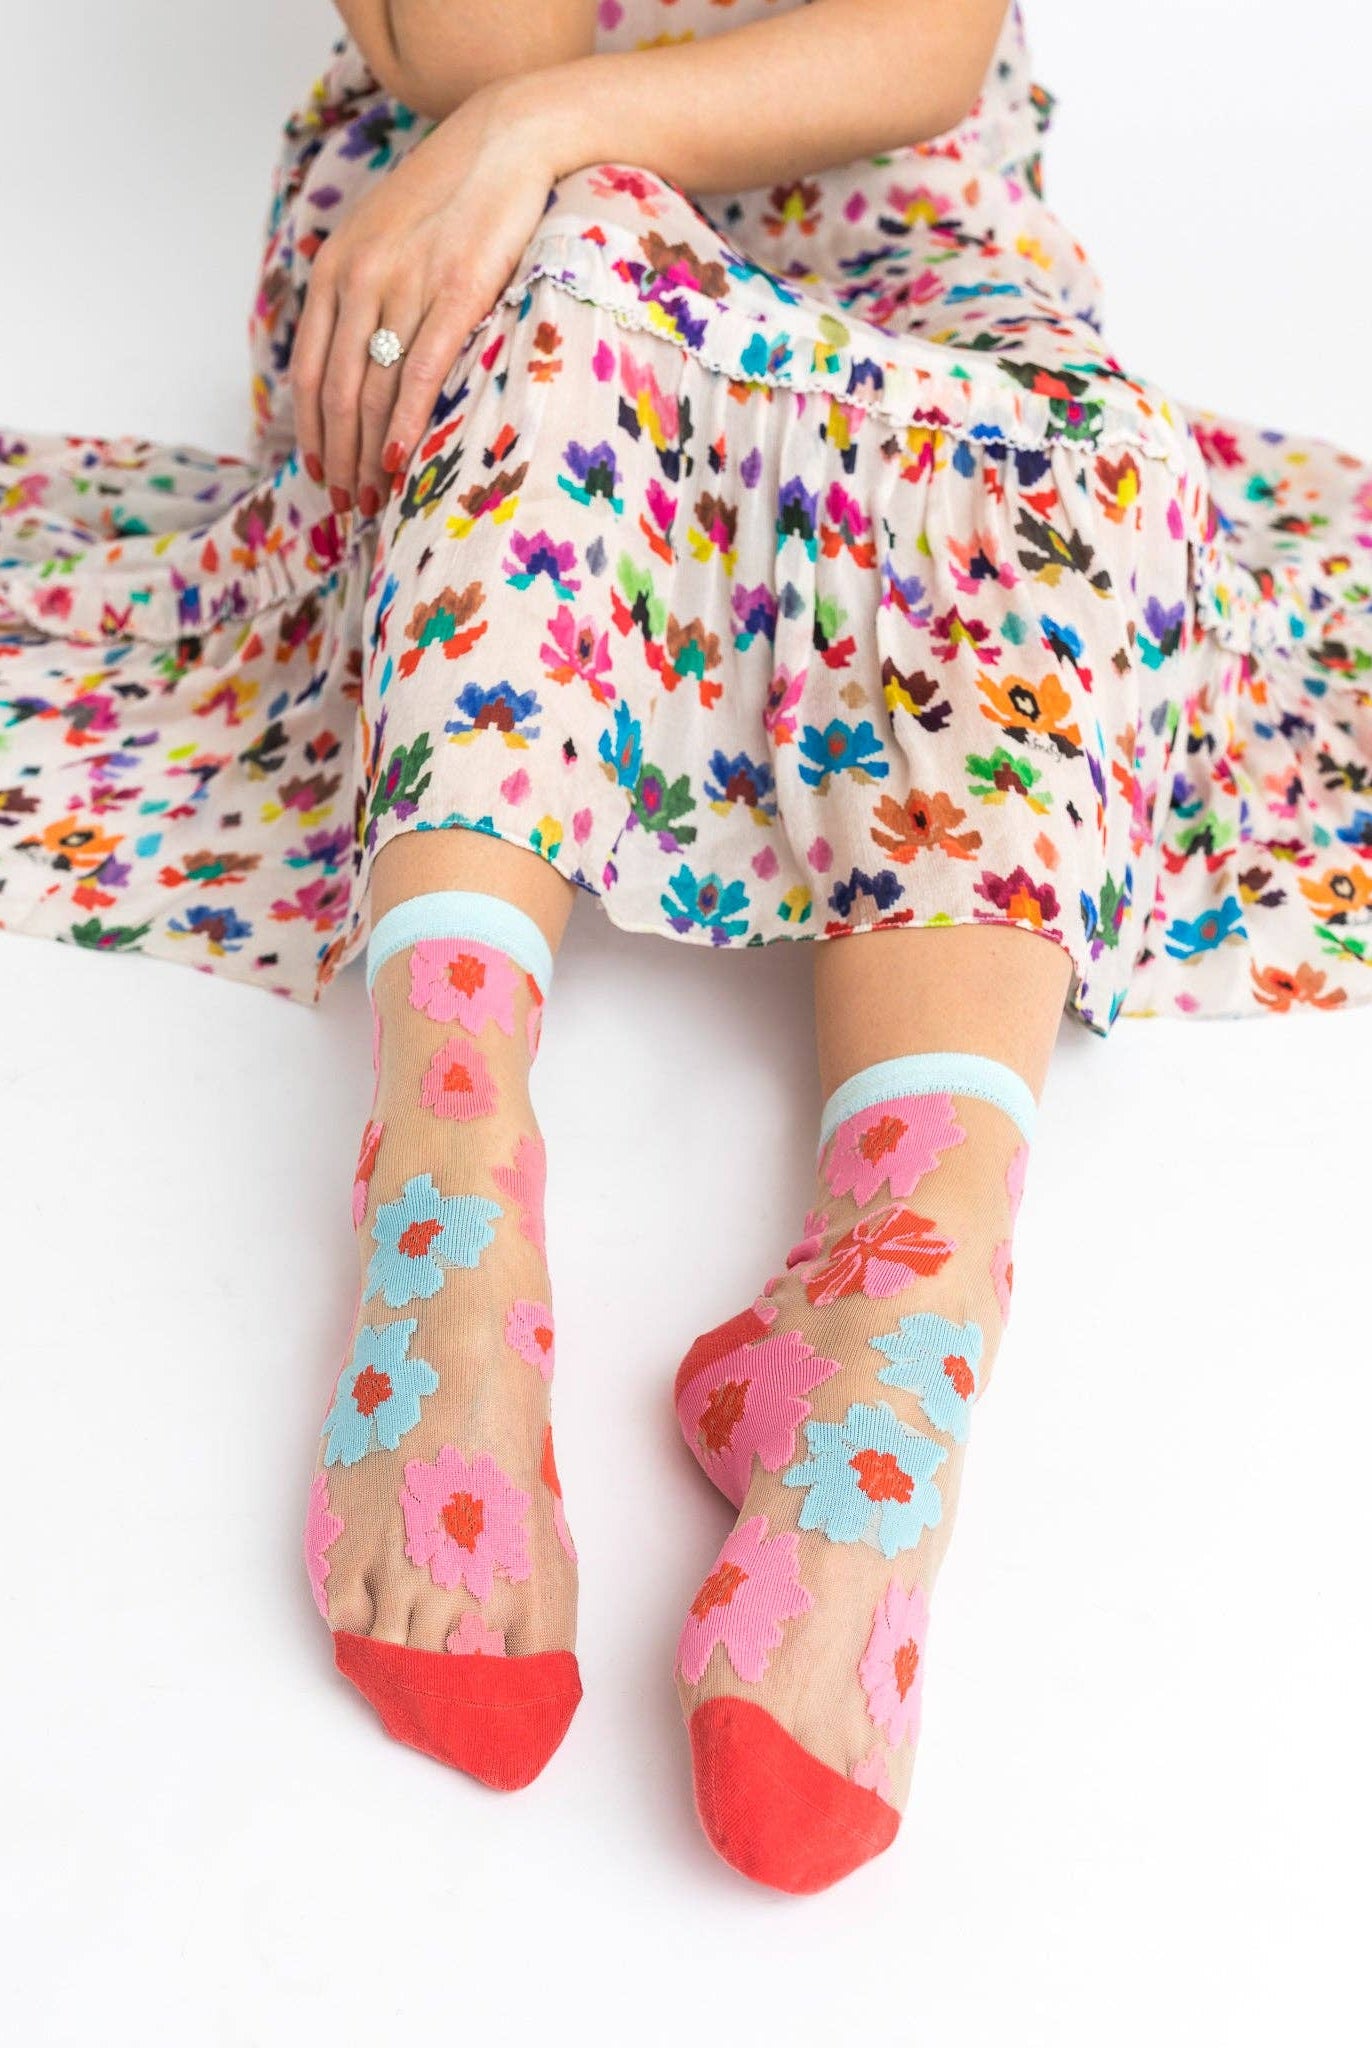 RIBBON ROSES SHEER ANKLE SOCK BY SOCK CANDY